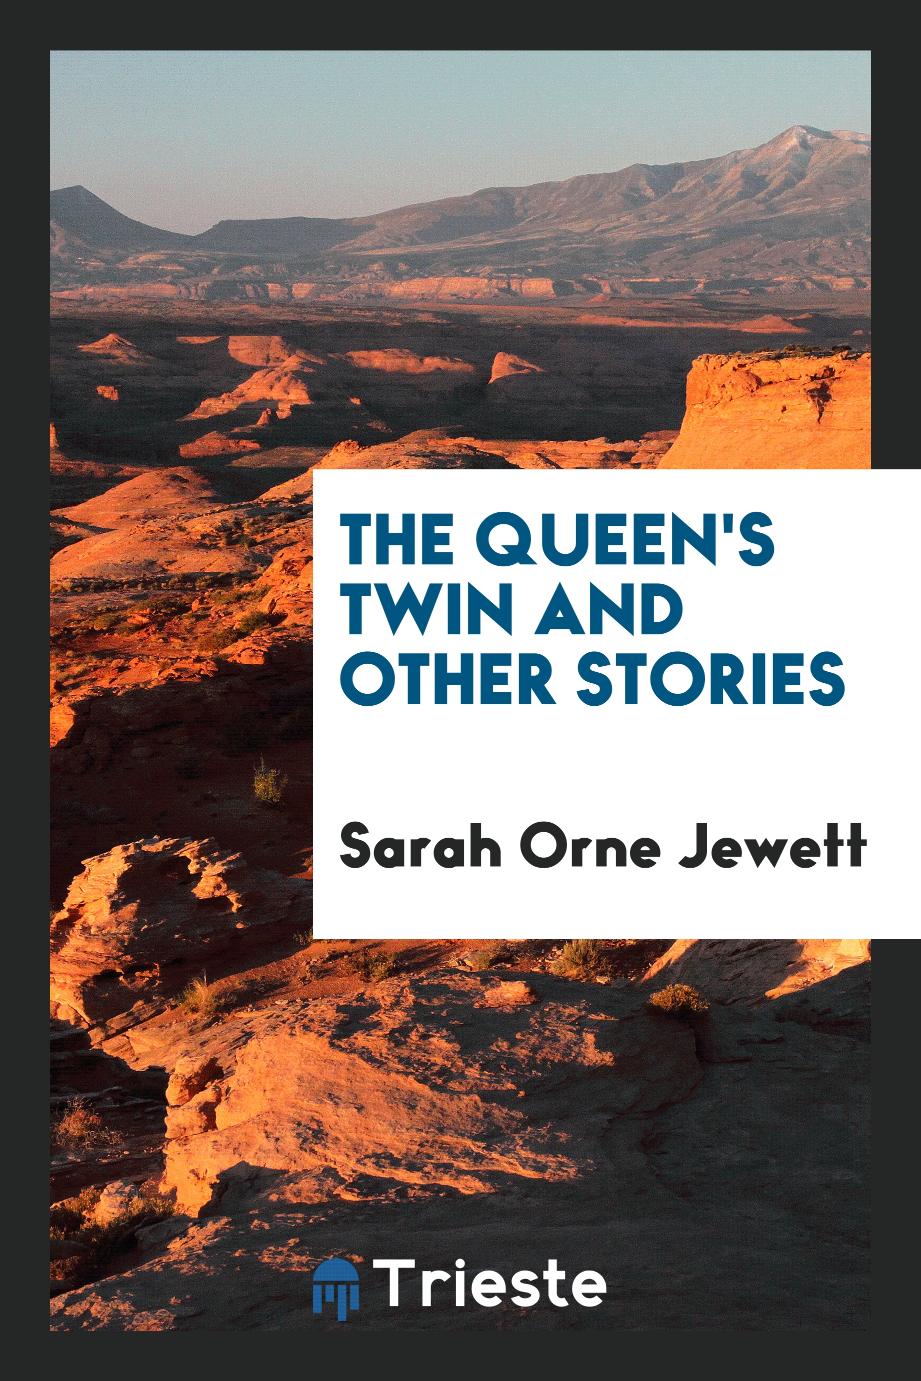 The Queen's Twin and Other Stories